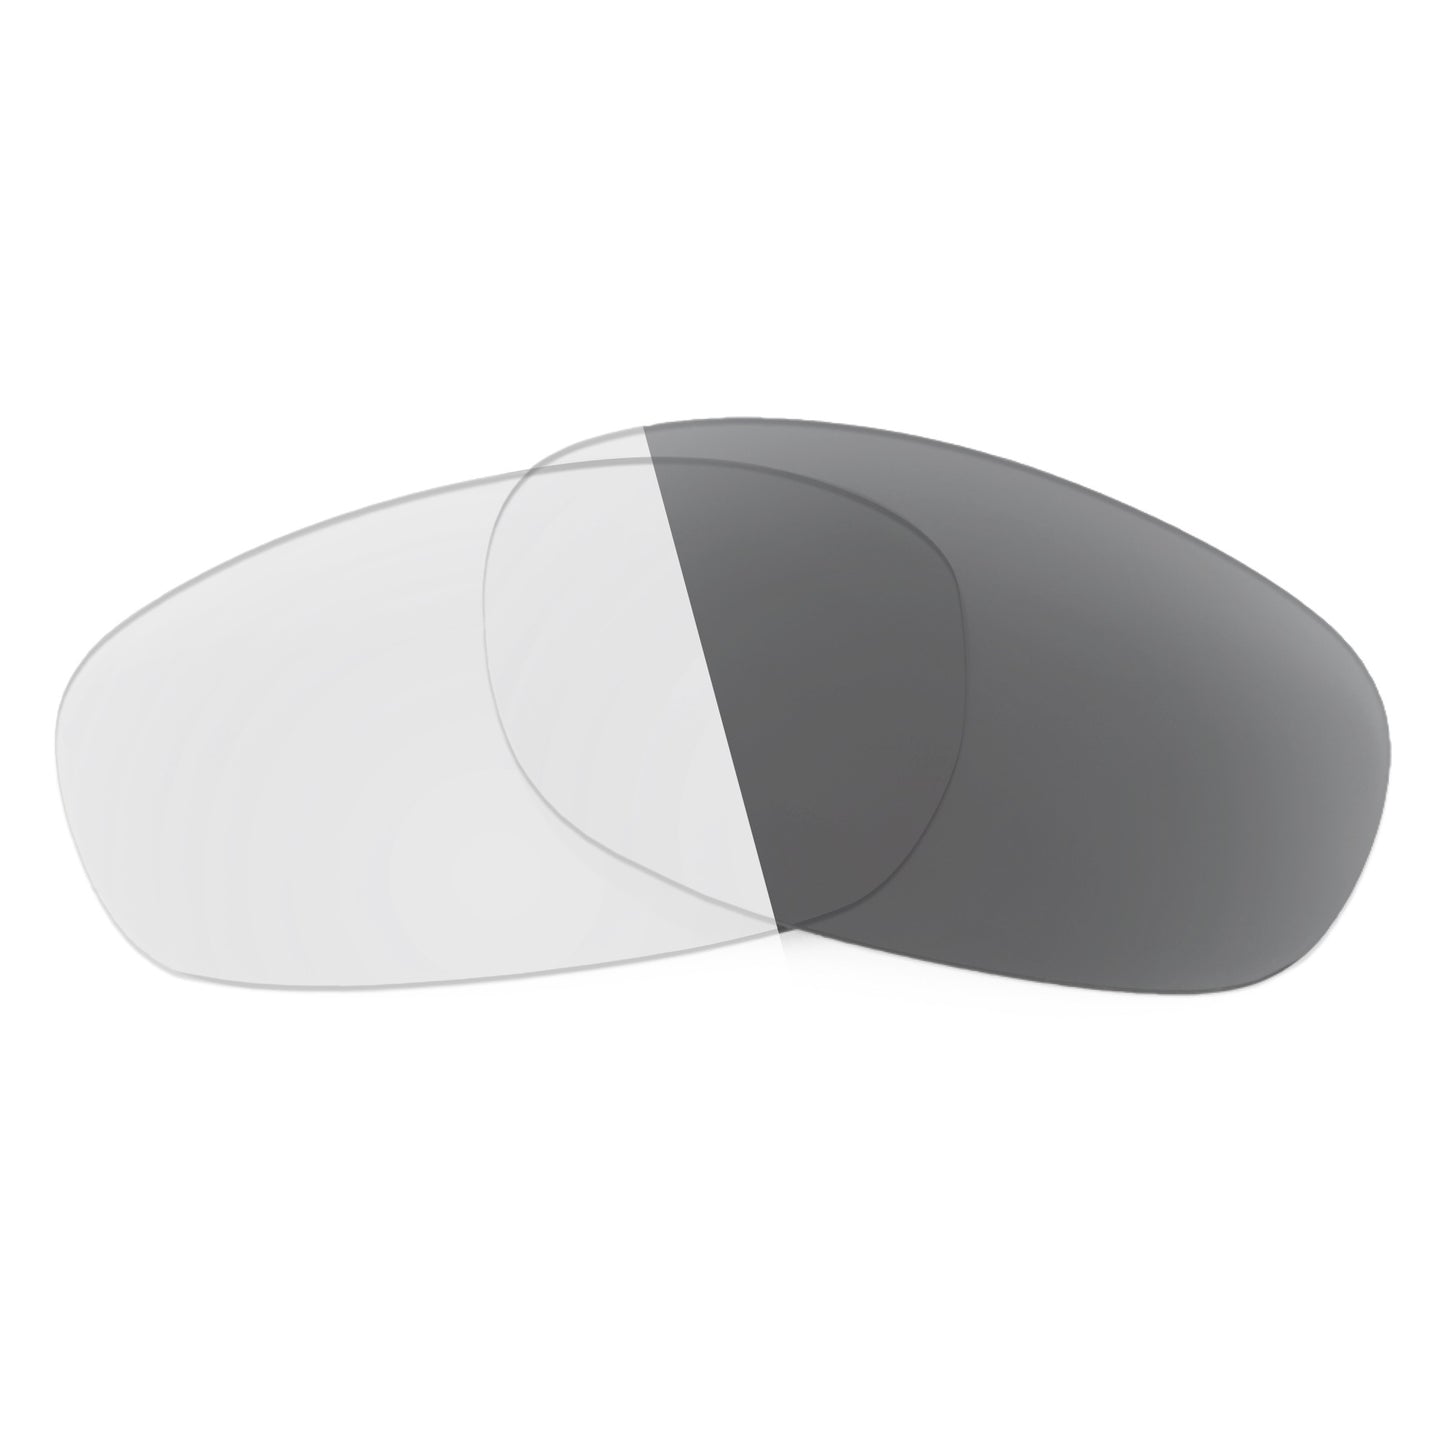 Revant replacement lenses for Wiley X Ignite Non-Polarized Adapt Gray Photochromic